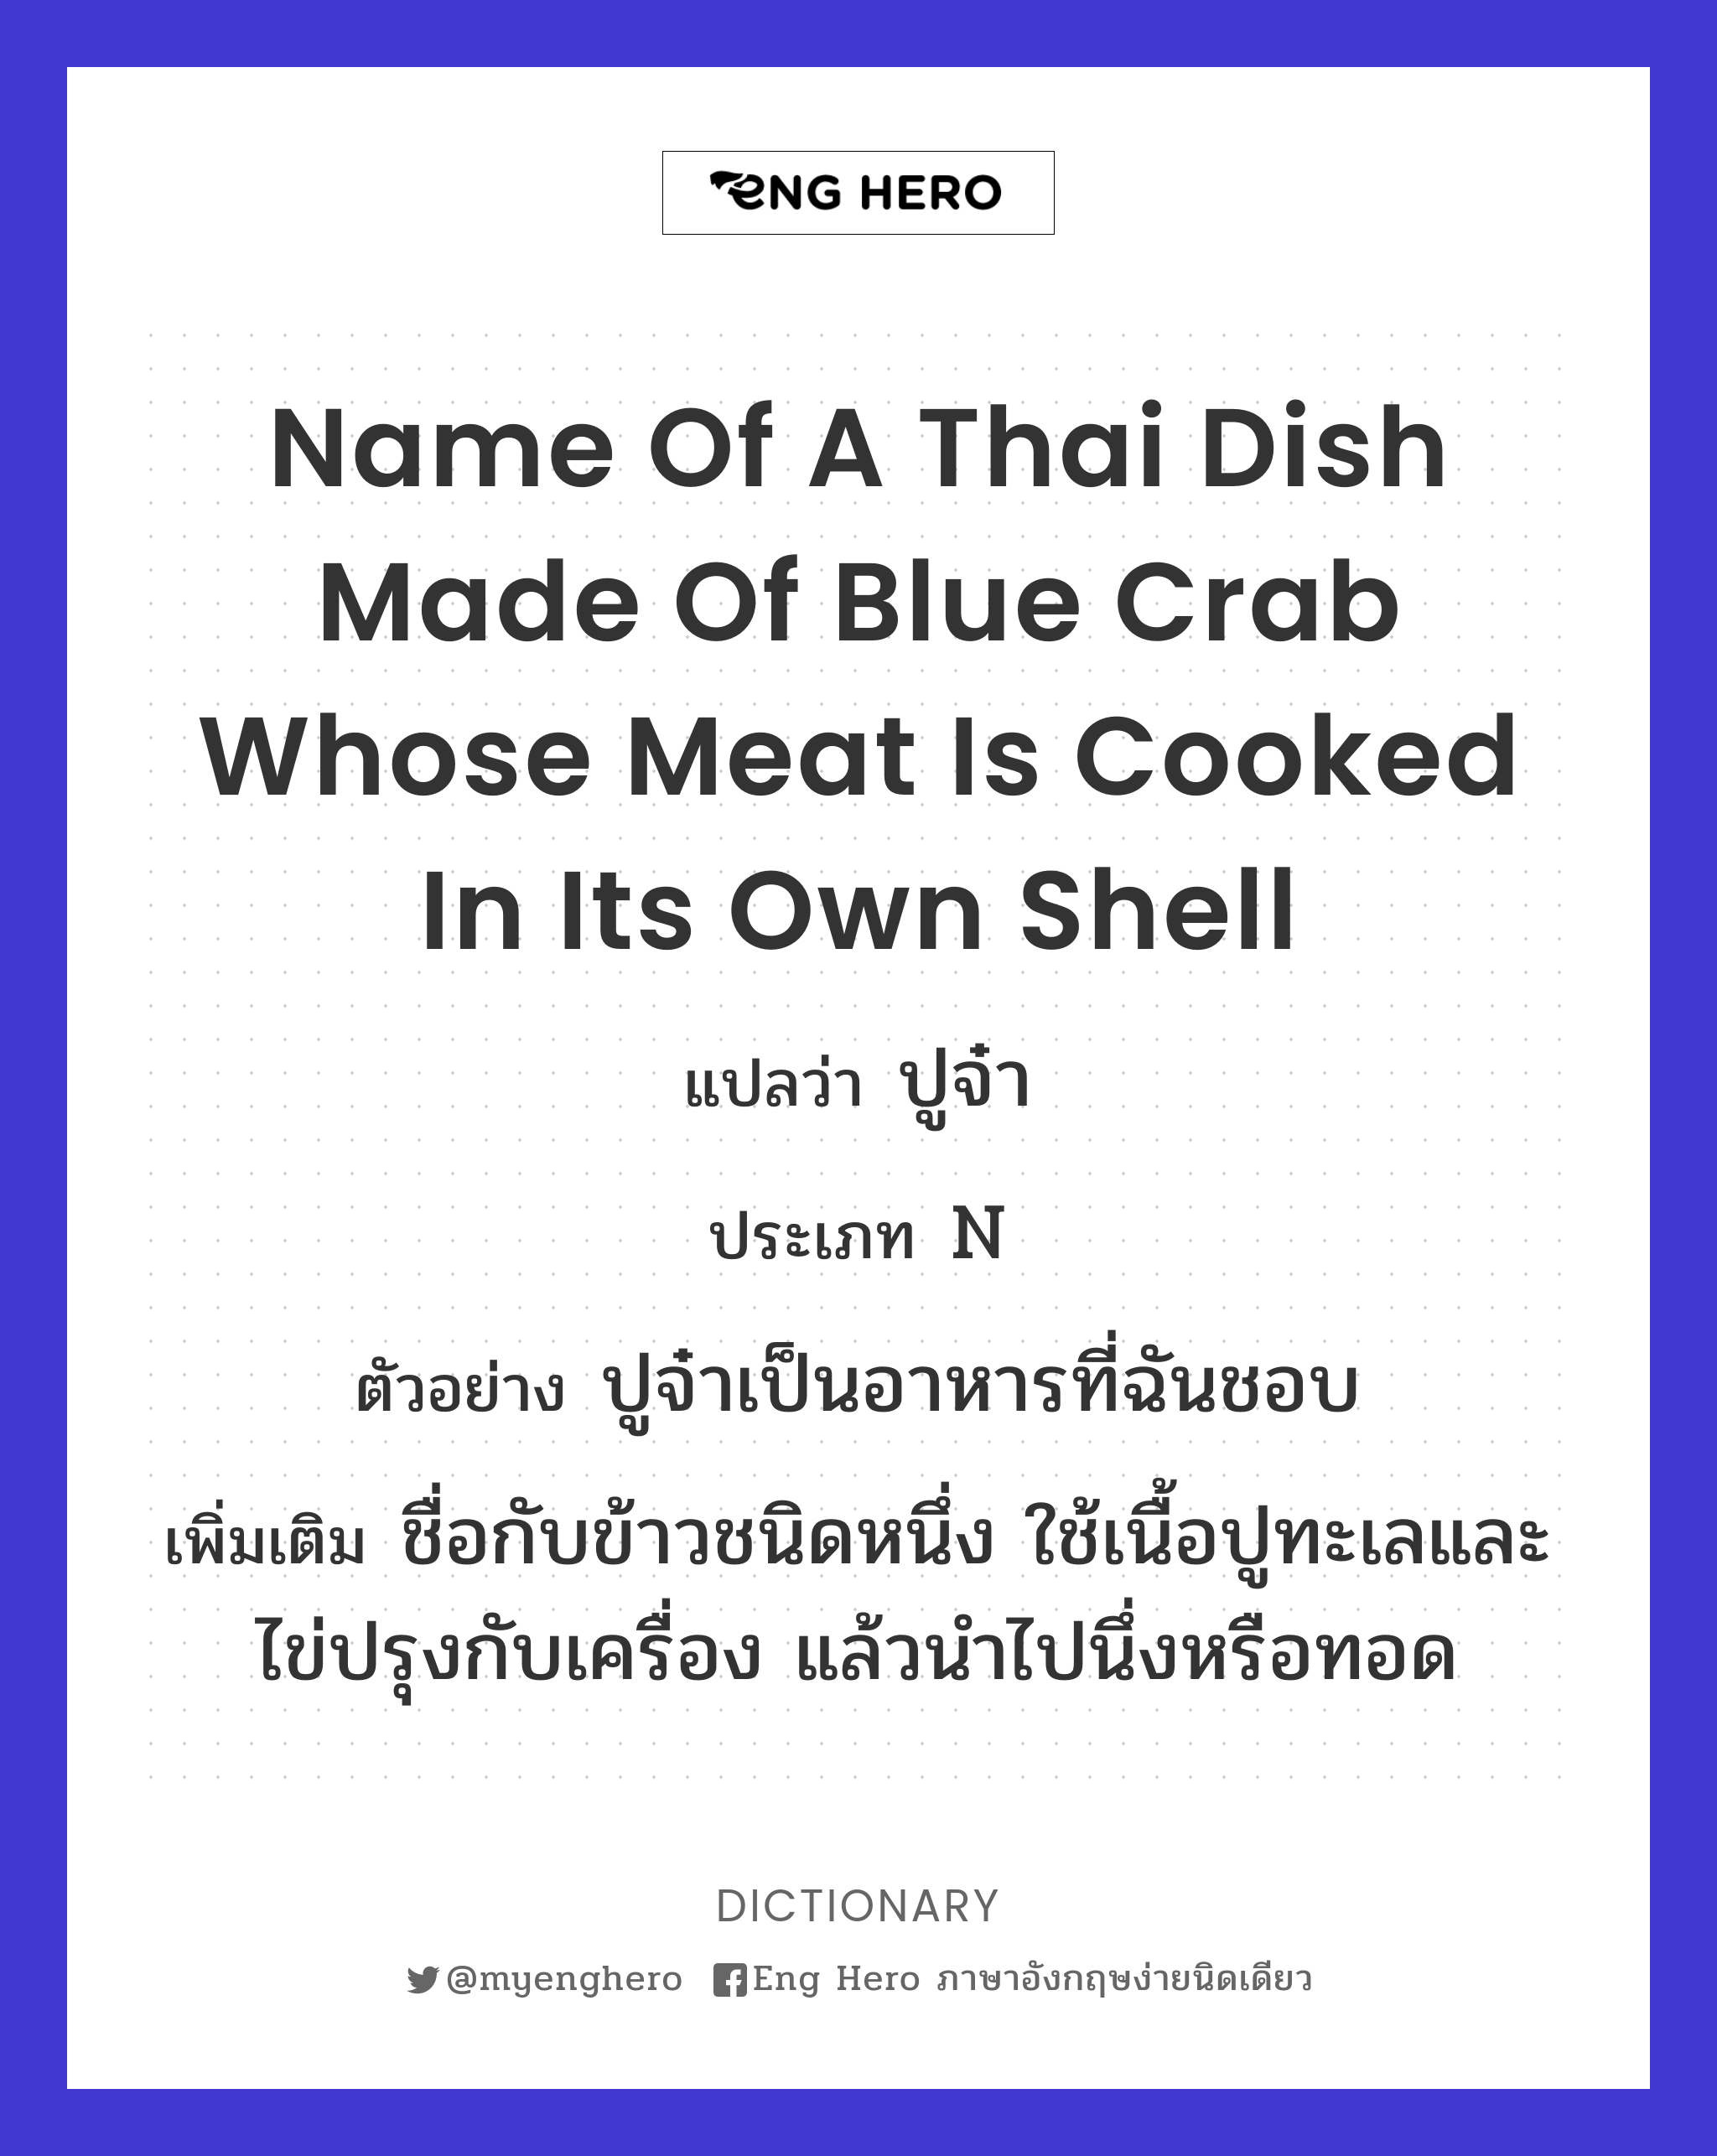 name of a Thai dish made of blue crab whose meat is cooked in its own shell